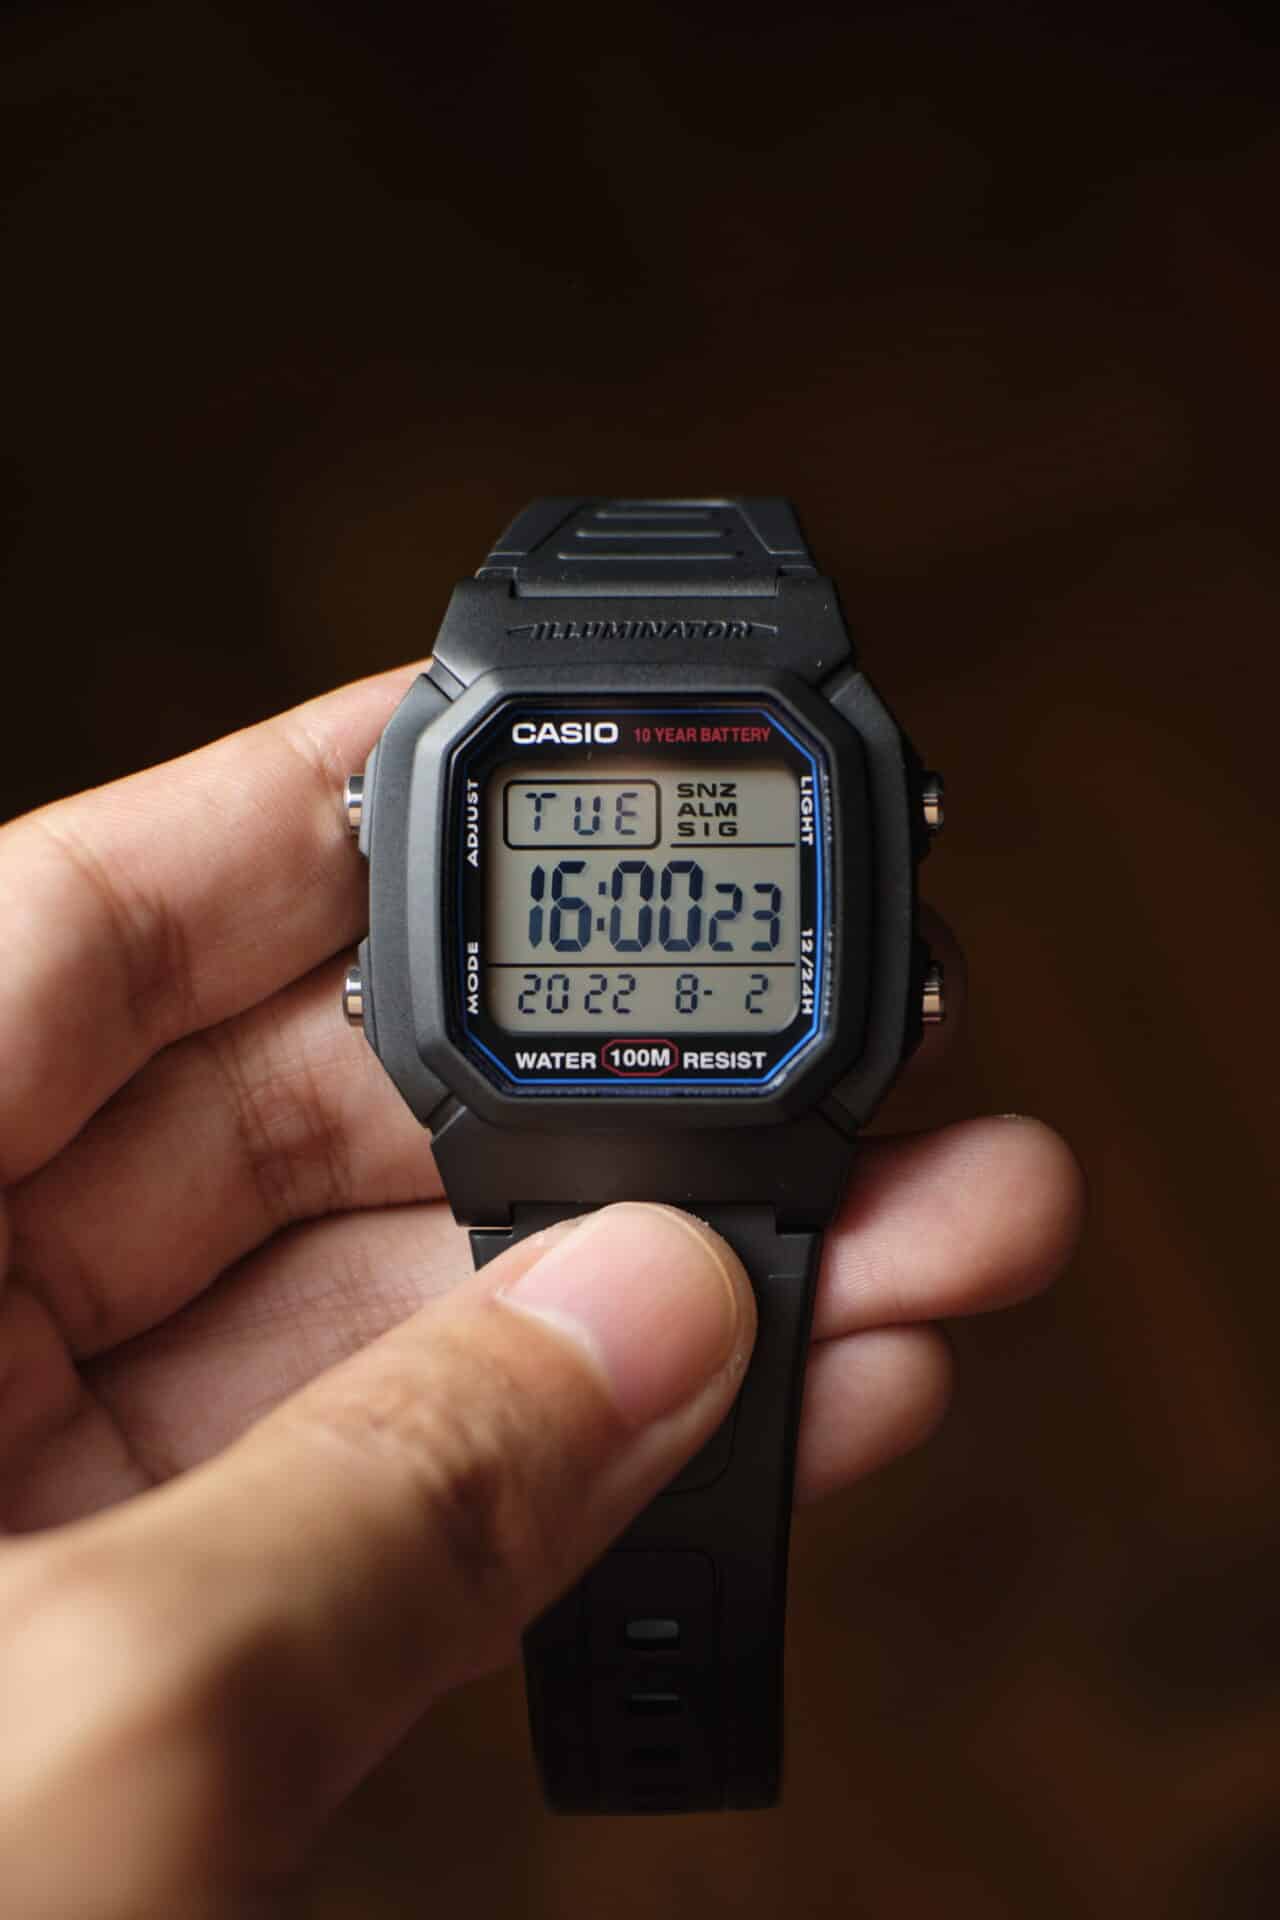 Holding the Casio W 800H